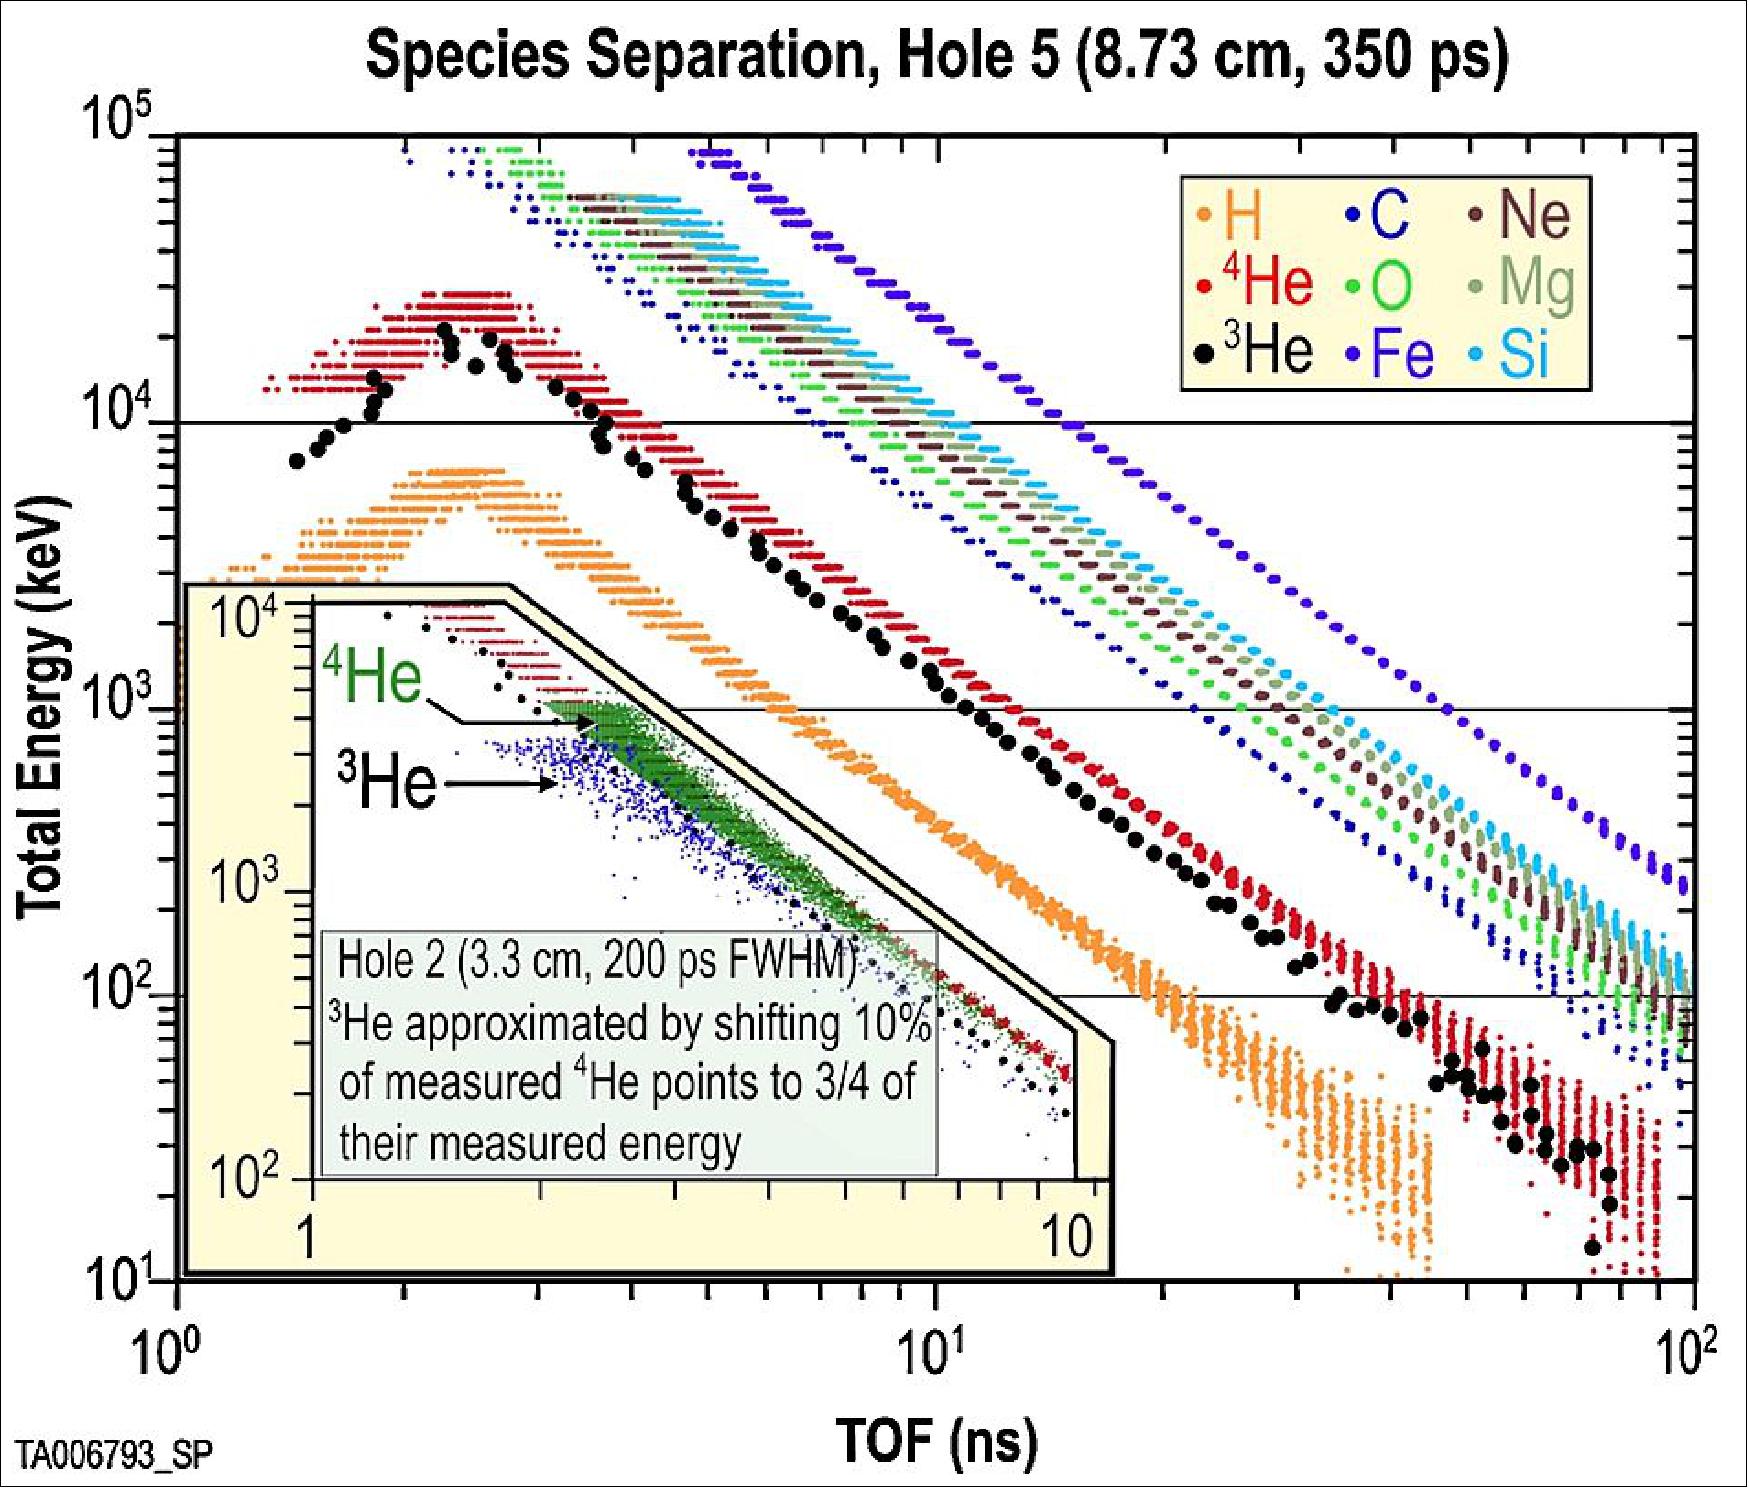 Figure 99: Representative species separation for EPI-Lo holes 2 (22.5º from the instrument normal) and 5 (the holes about the instrument perimeter, 90º from instrument normal) based on measured TOF resolution performance on test model. Data taken using an alpha source in hole 2 is overlaid on the hole 2 simulated data. 3He is well distinguished from 4He at 1:100 abundance ratio to ≥1.5 MeV/nuc. The best performance for species identification is in the 64 holes at the 3, 4 and 5 positions, at 45º, 67.5º, and 90º from the instrument normal (image credit: ISIS-EPI collaboration)